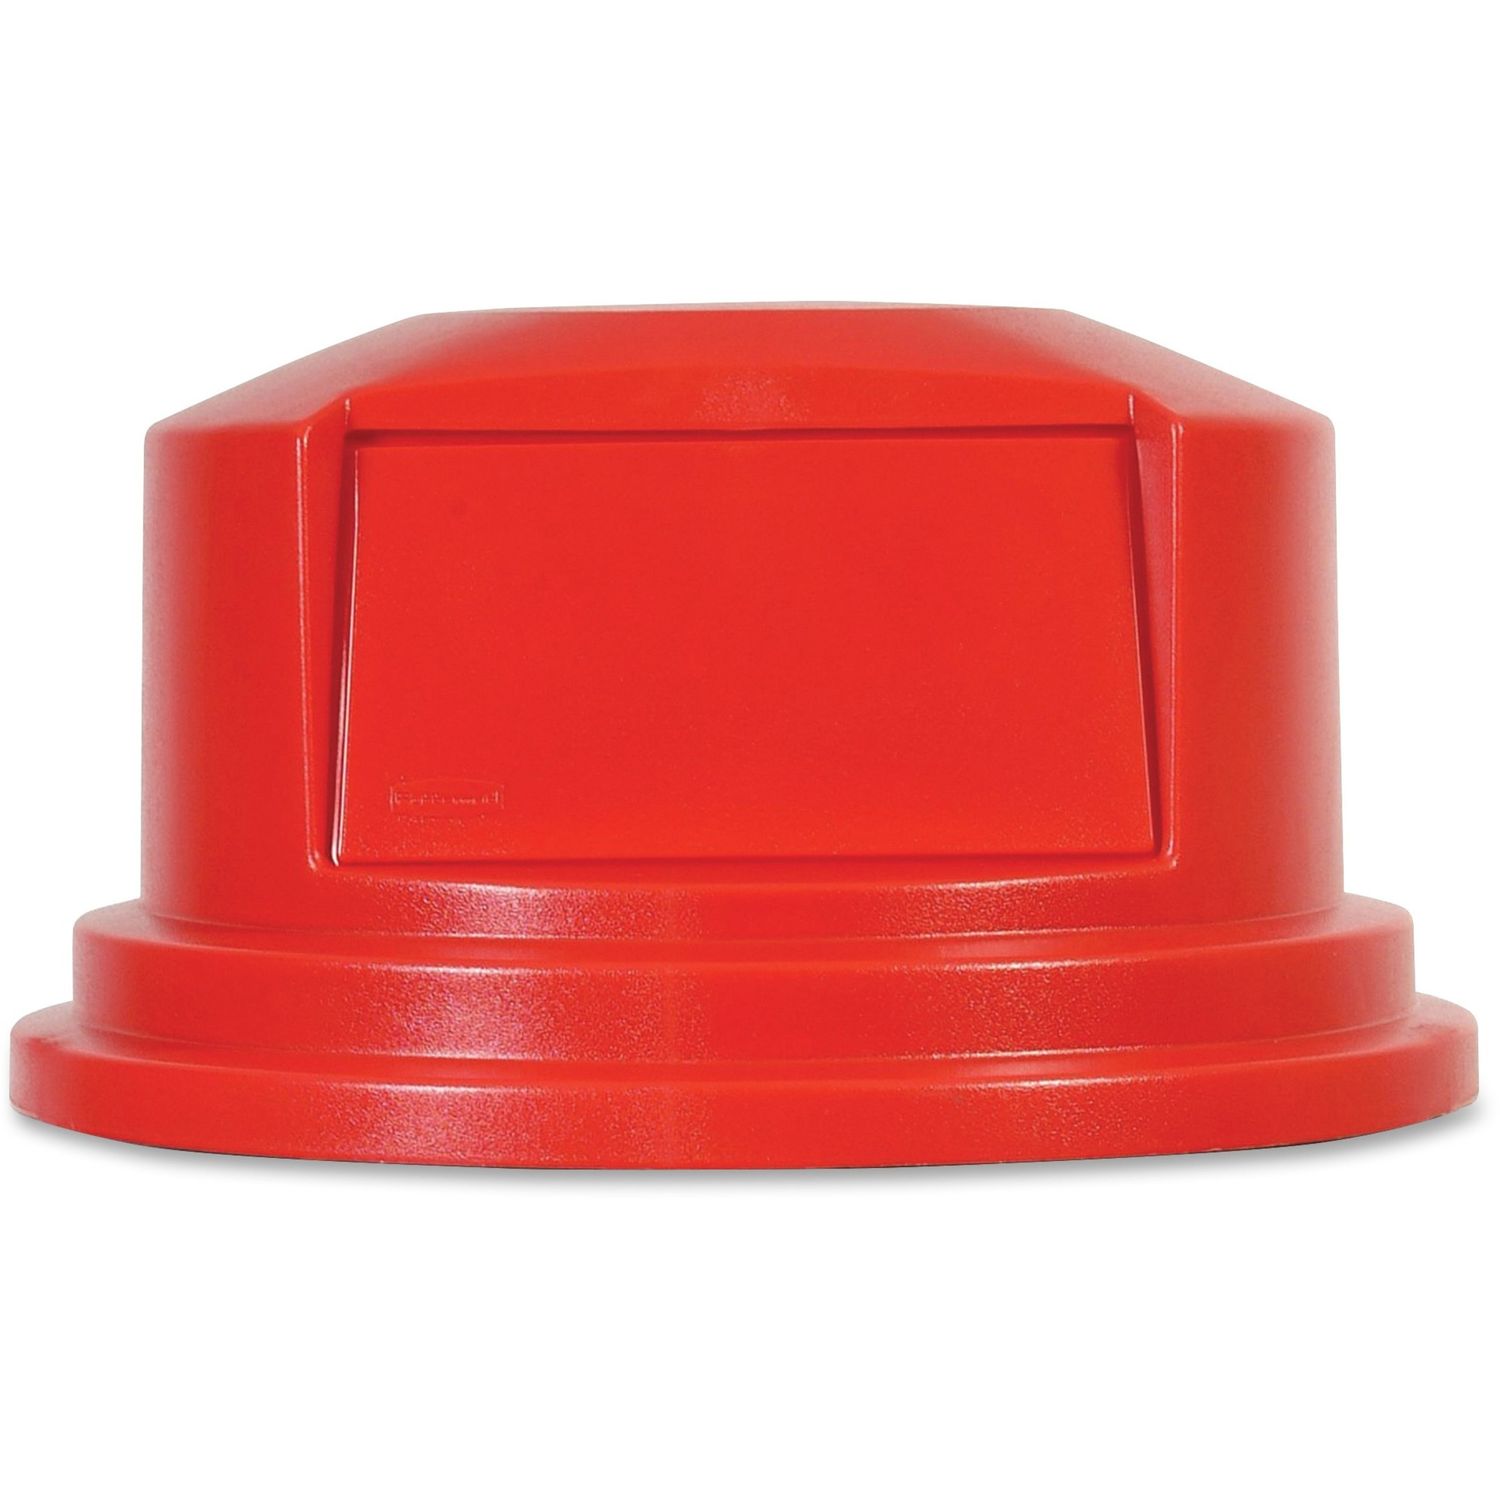 55-gal Brute Container Dome Top Dome, Plastic, 1 / Carton, Red